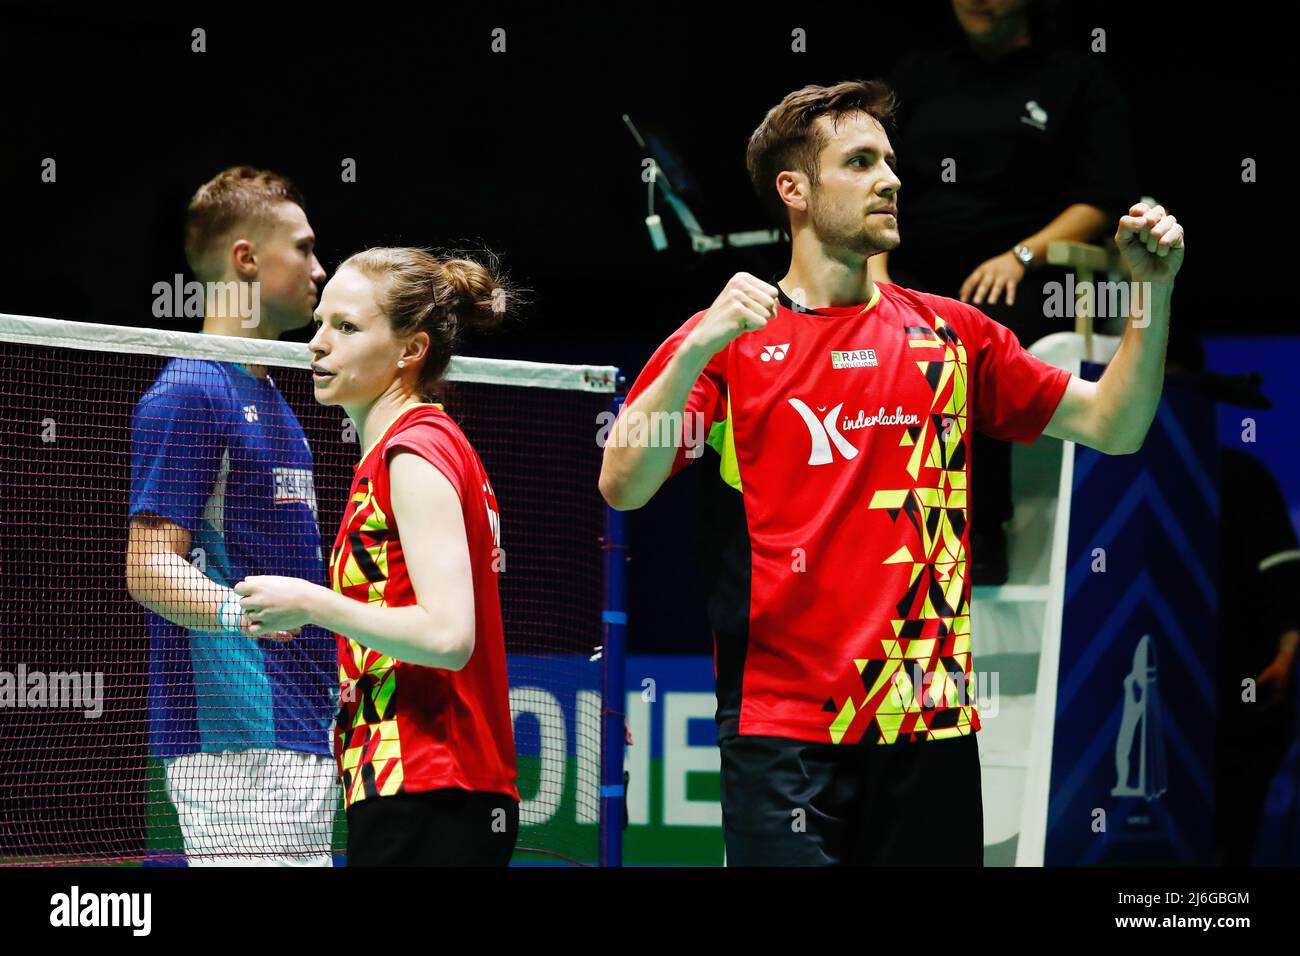 April 30, 2022, Madrid, Spain: Isabel Lohau and Mark Lamsfuss from Germany  celebrate the victory as gold medal winners, Final Mixed Doubles during the  European Badminton Championships 2022 on April 30, 2022